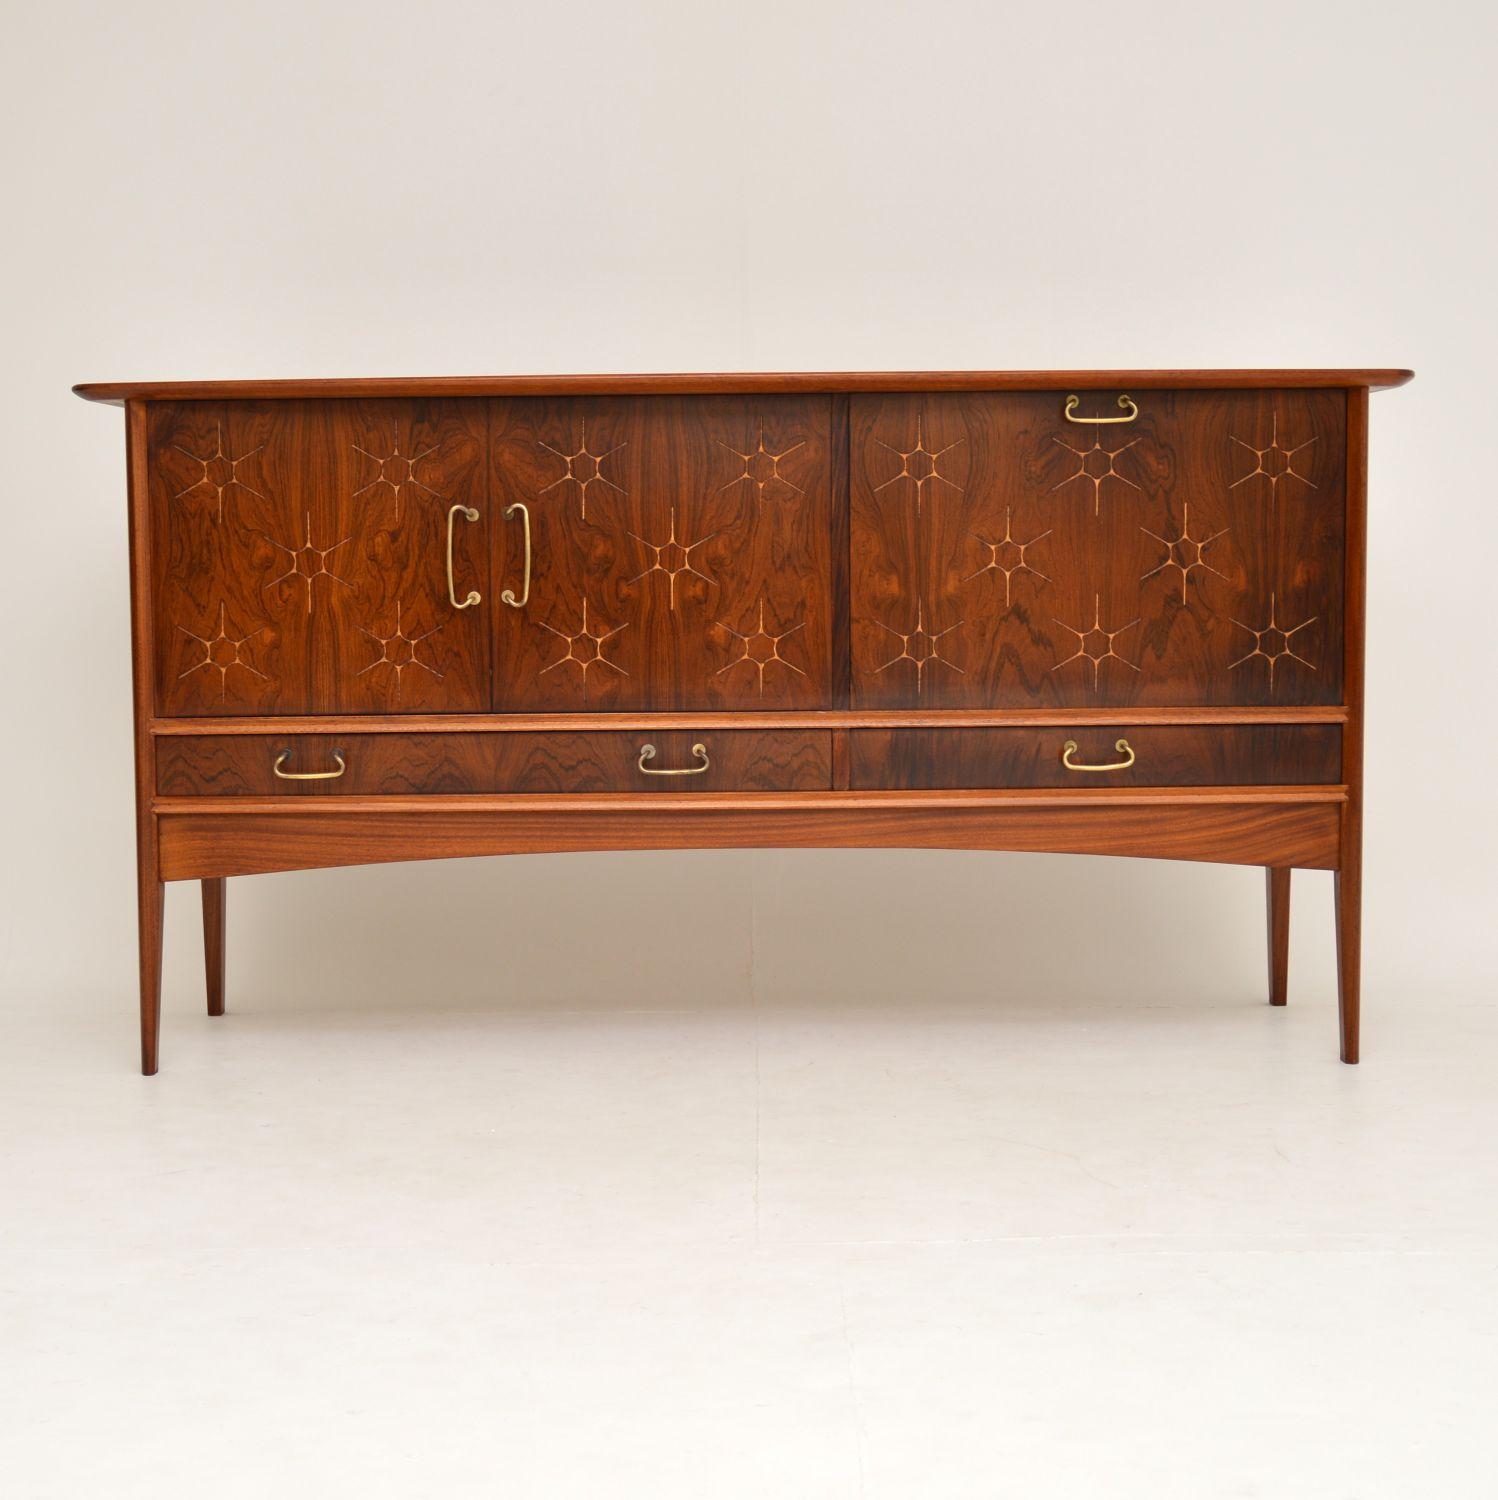 A beautiful and iconic design, this is the starburst sideboard, designed by Peter Hayward for Vanson. It dates from the 1950s-1960s, and has been fully stripped and re-polished to perfection; you’re unlikely to find one on better condition than